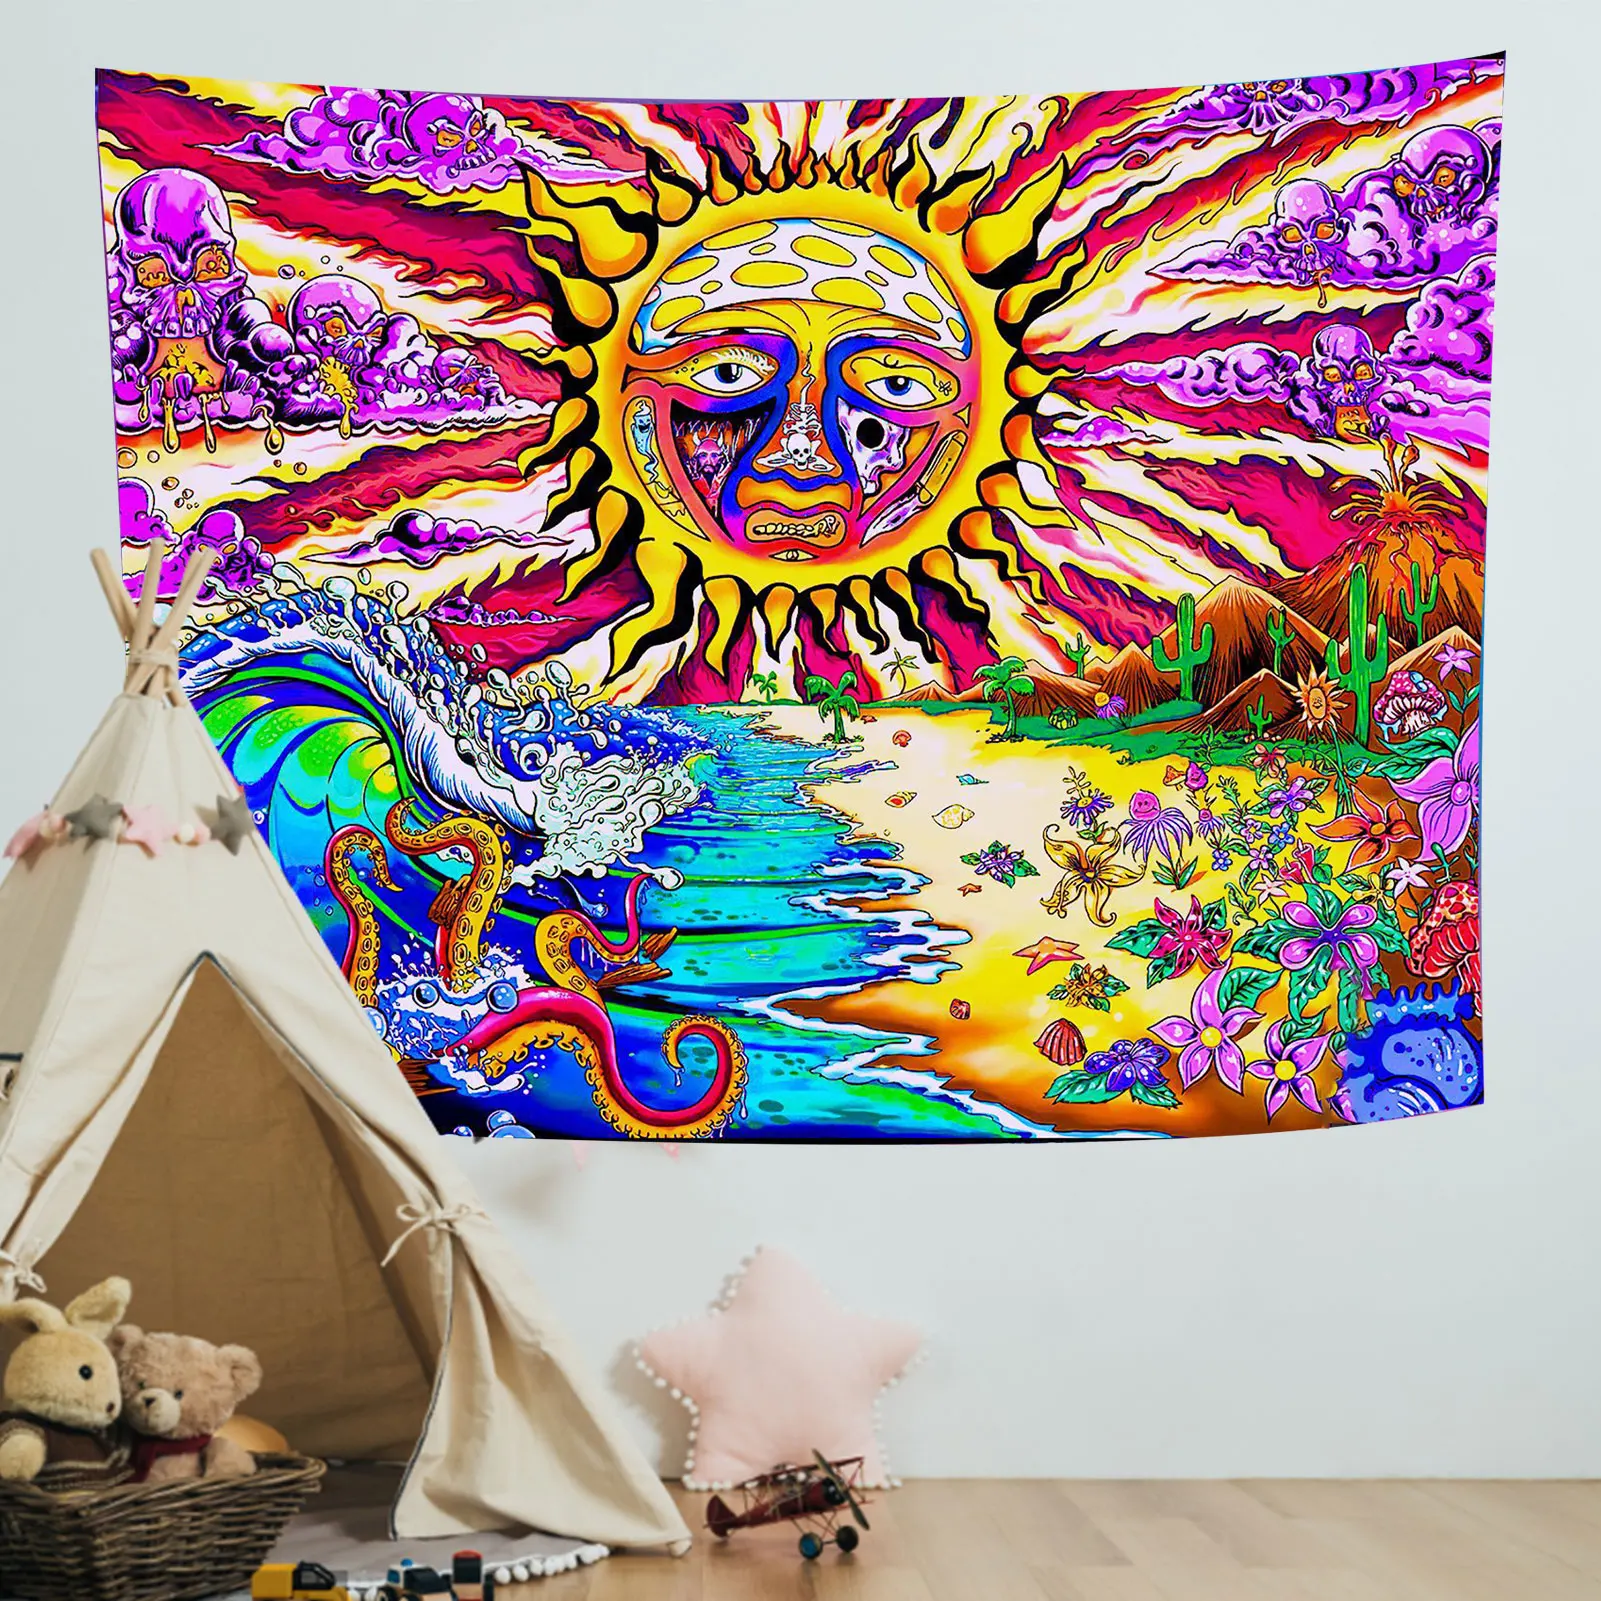 

Trippy Sun Tapestry Psychedelic Wall Art Tapestries Aesthetic Witchcraft Wall Hanging Blanket for Home Bedroom Living Room Decor